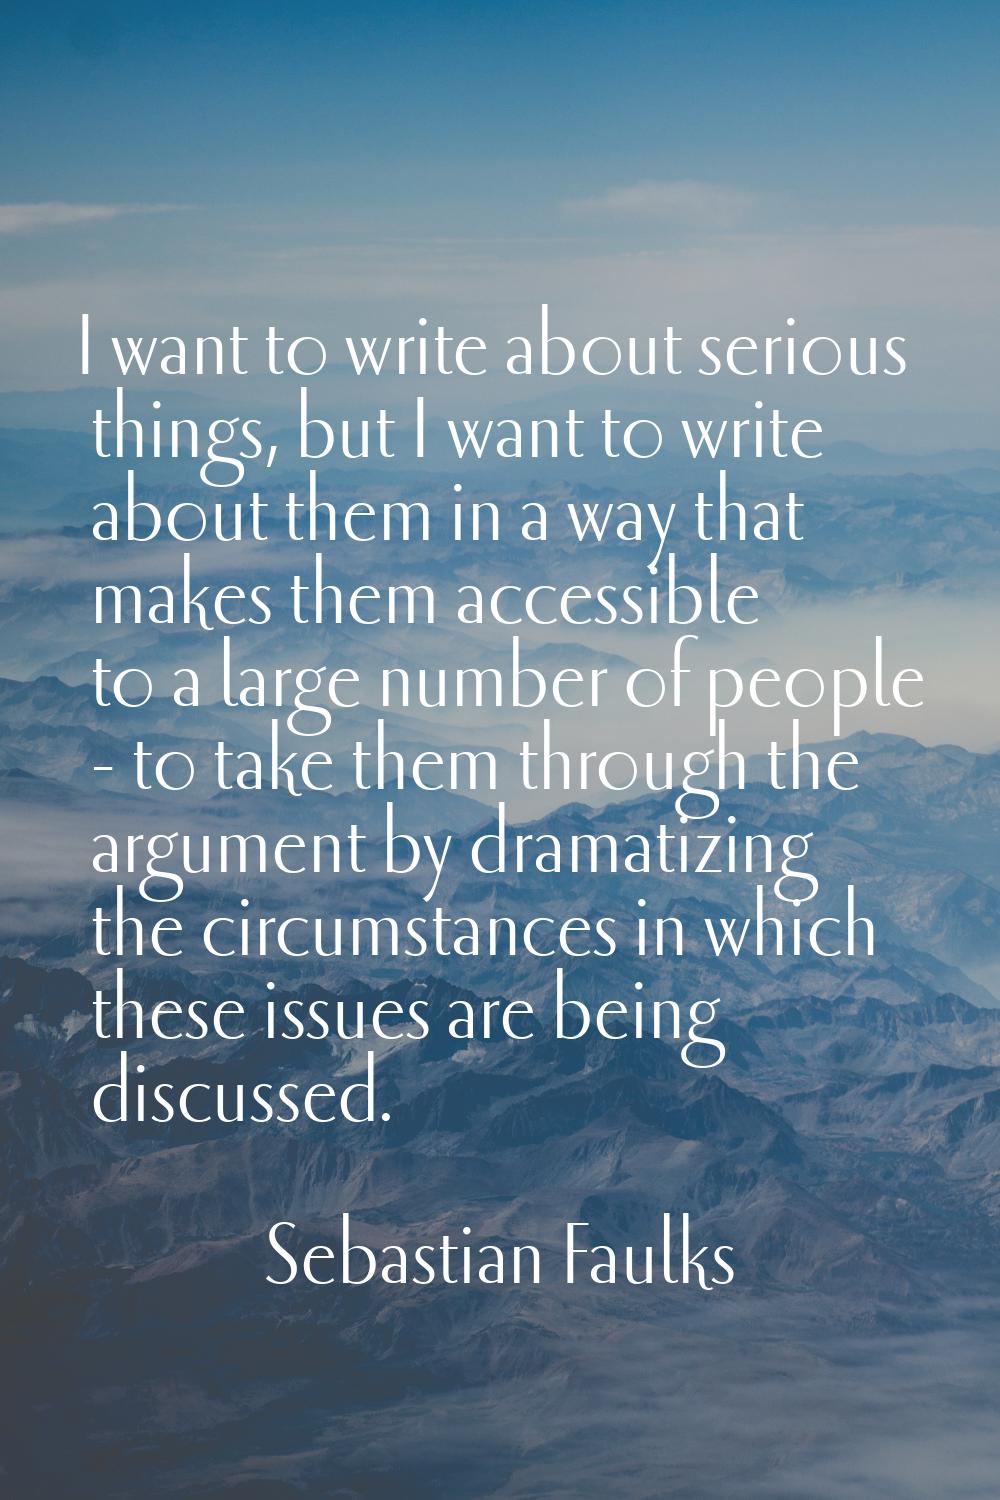 I want to write about serious things, but I want to write about them in a way that makes them acces